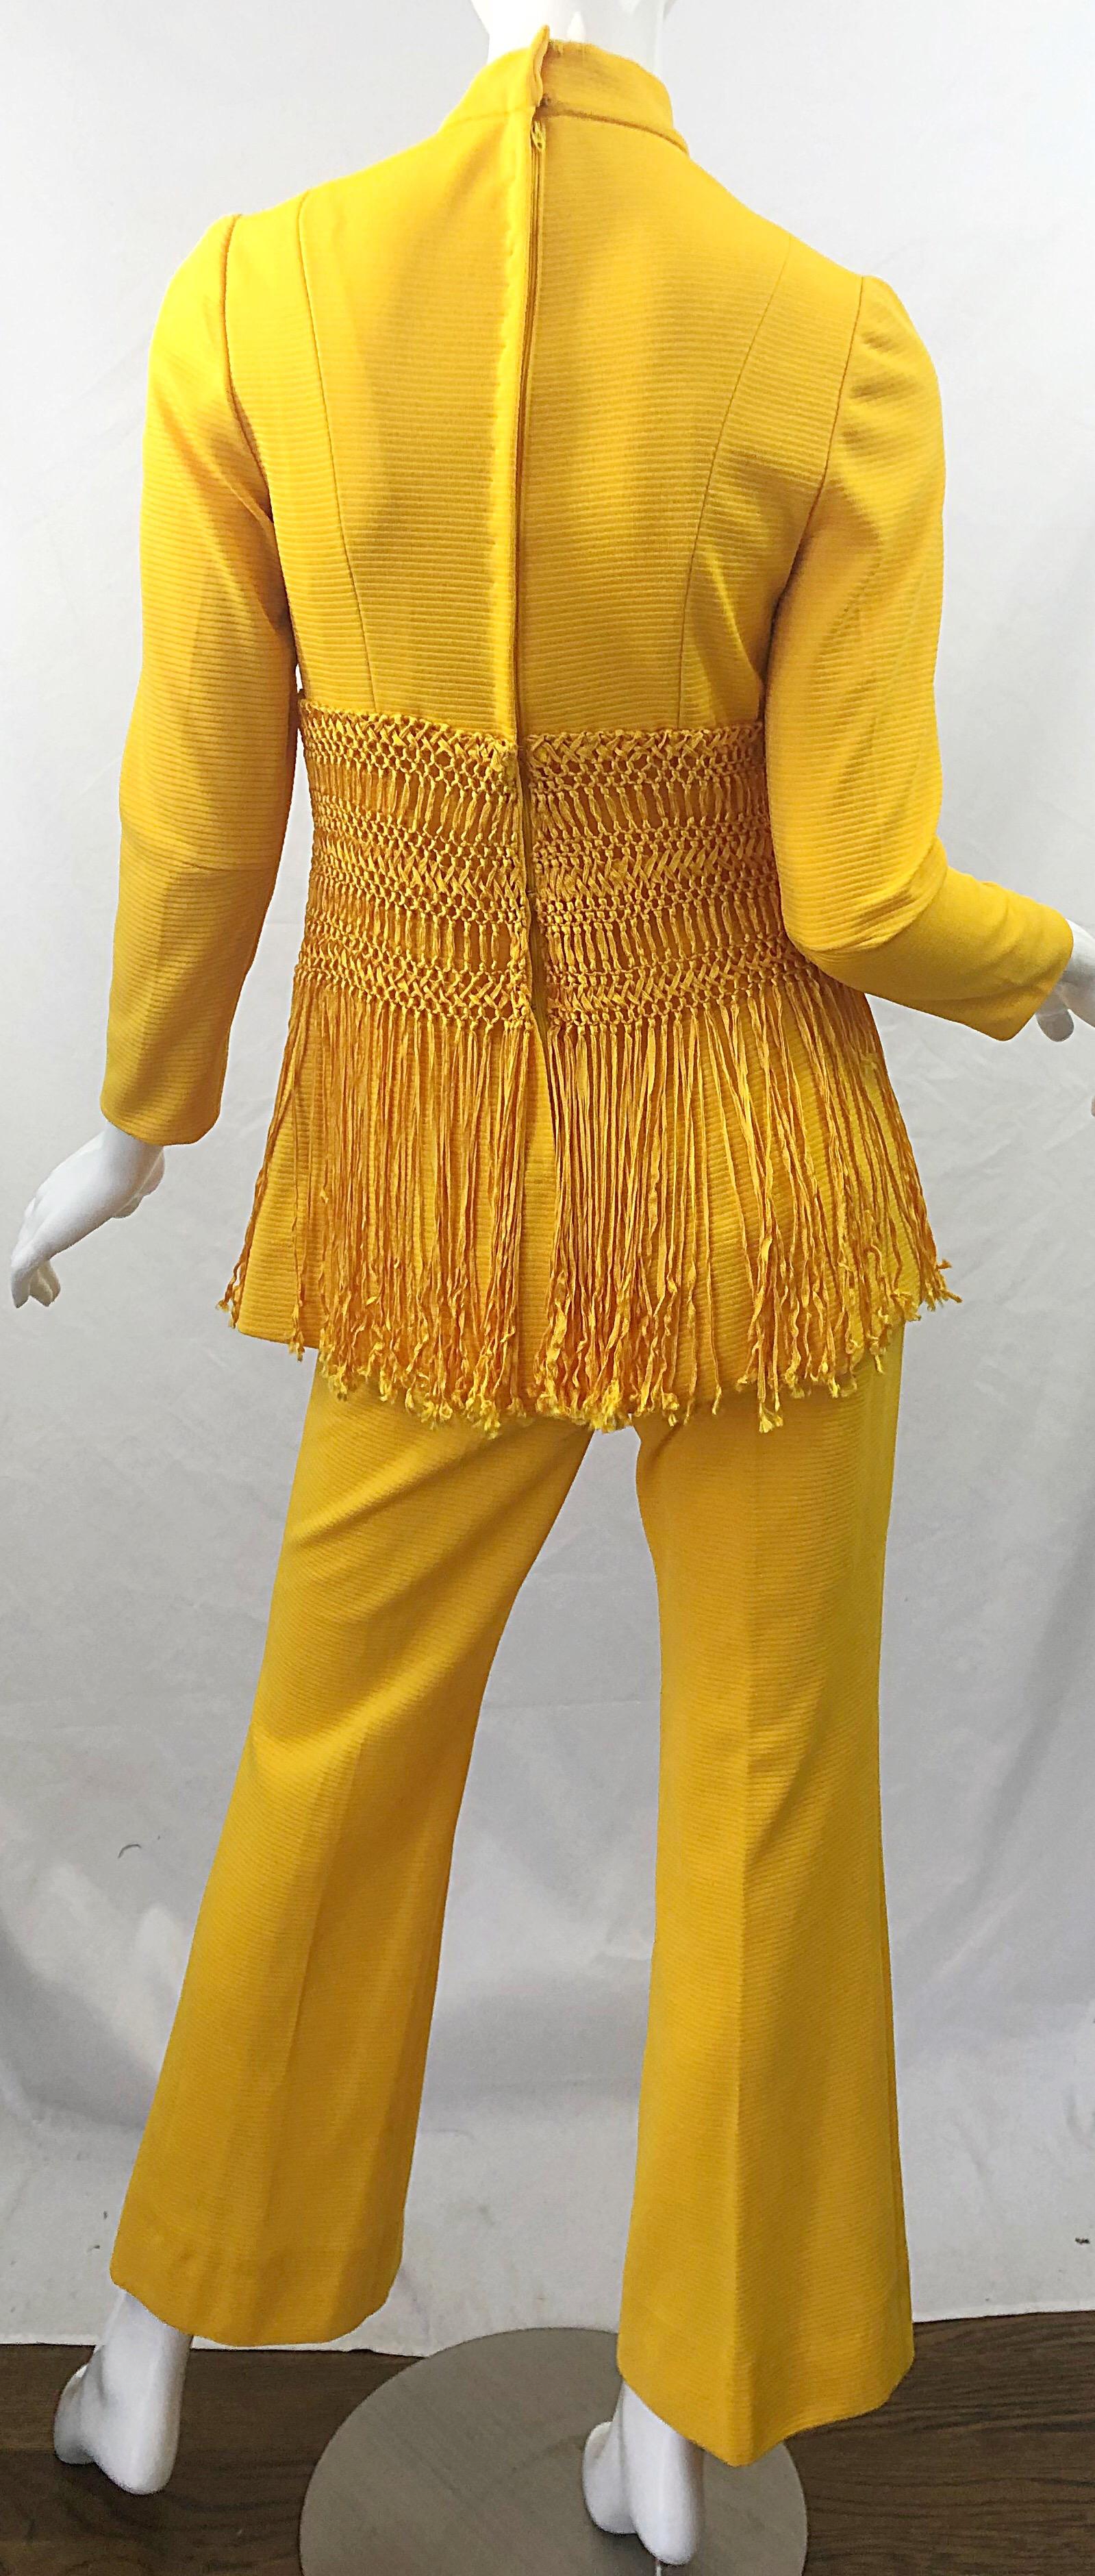 1970s Canary Yellow Fringe Vintage Knit Tunic Top + 70s Bell Bottom Flared Pants 1